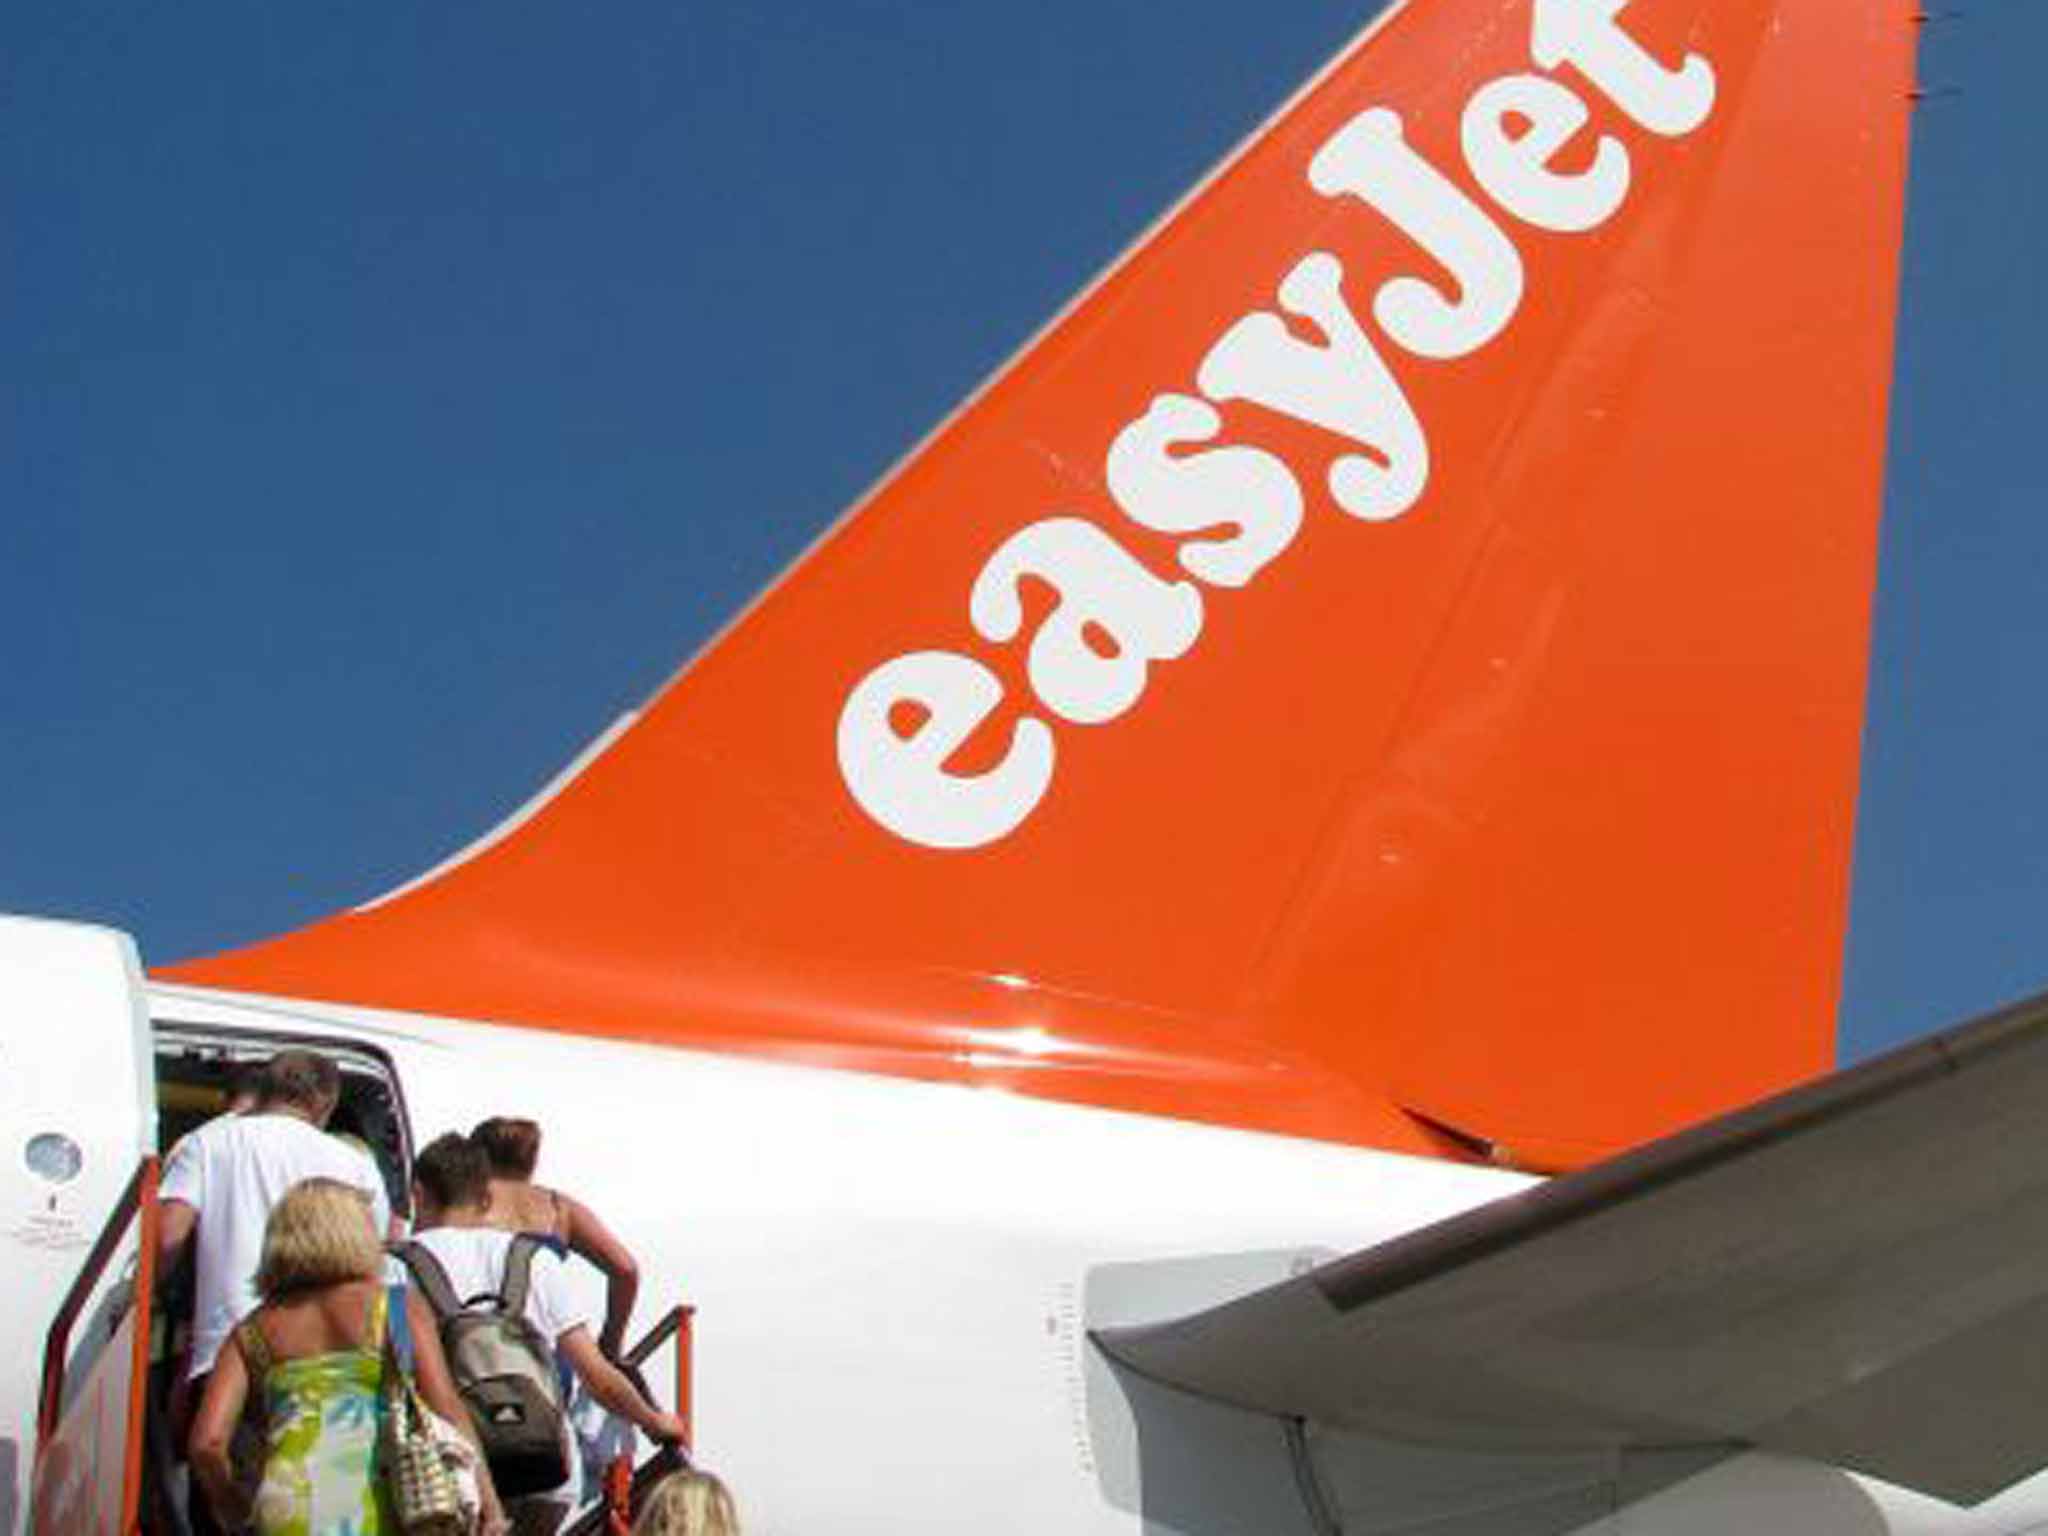 easyJet, forecast that for the third quarter revenue per seat (RPS) would decline by around 7%, partially due to the attacks in Brussels in March.